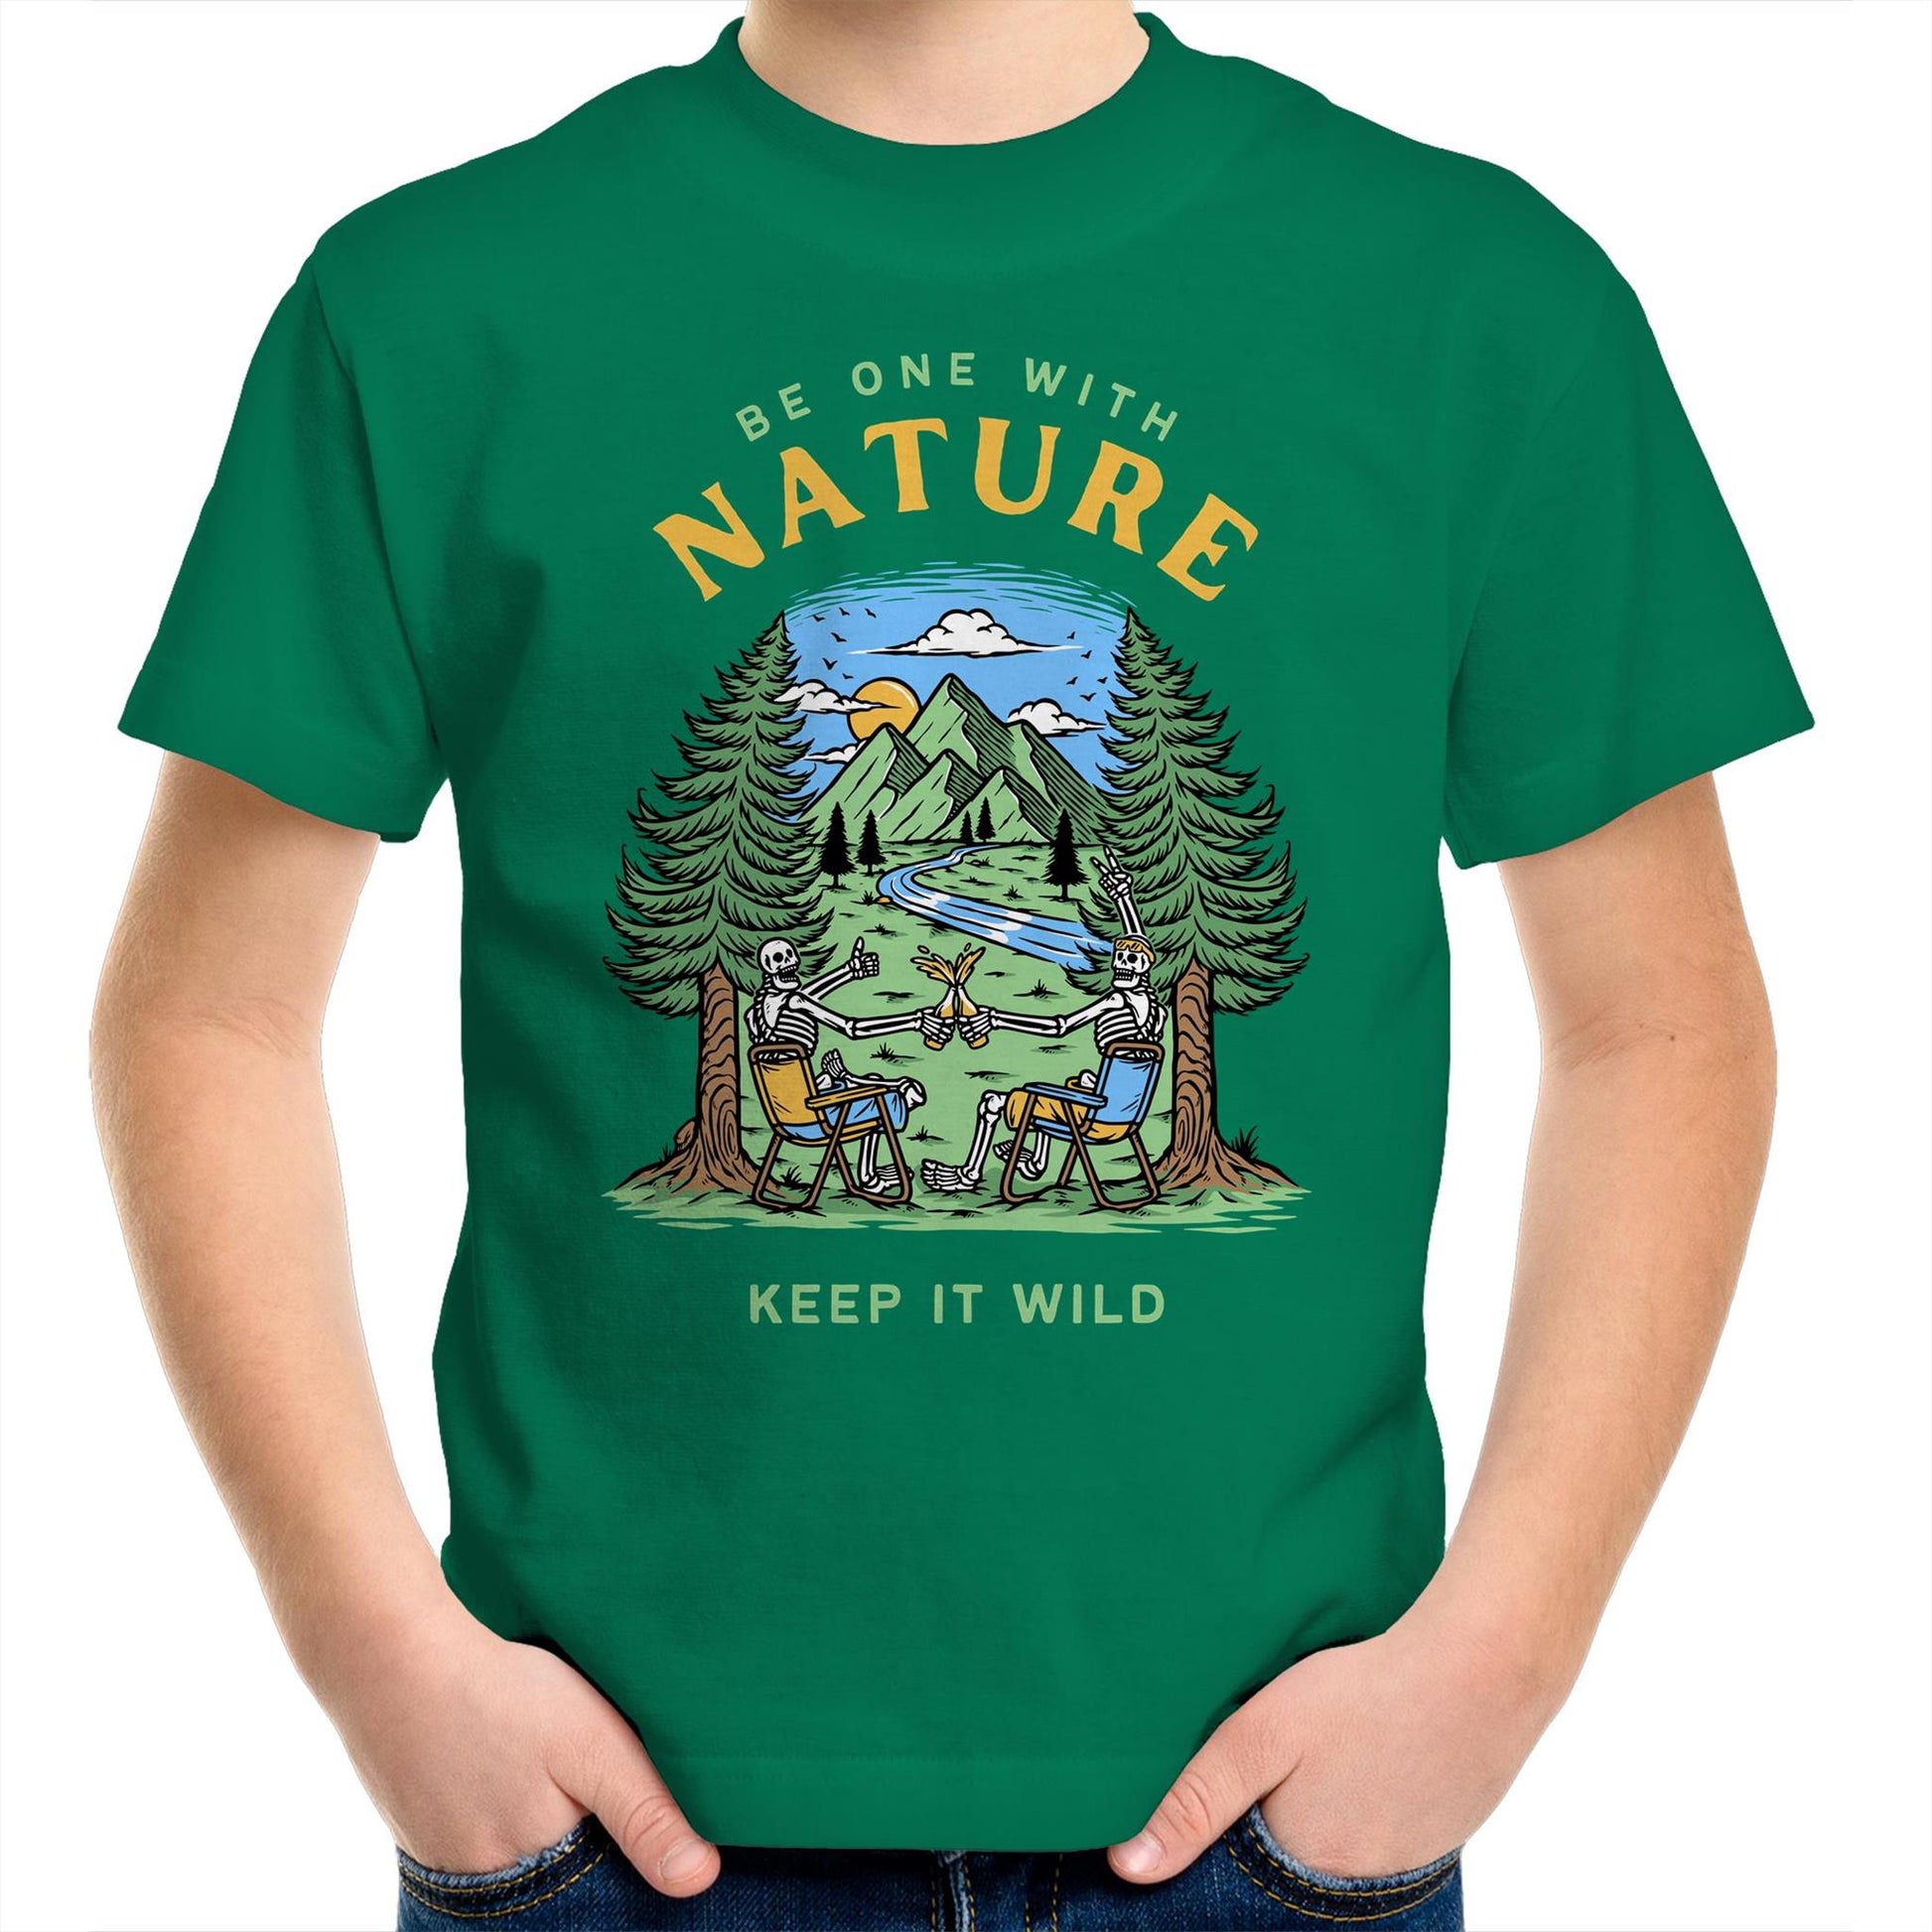 Be One With Nature, Skeleton - Kids Youth T-Shirt Kelly Green Kids Youth T-shirt Environment Summer